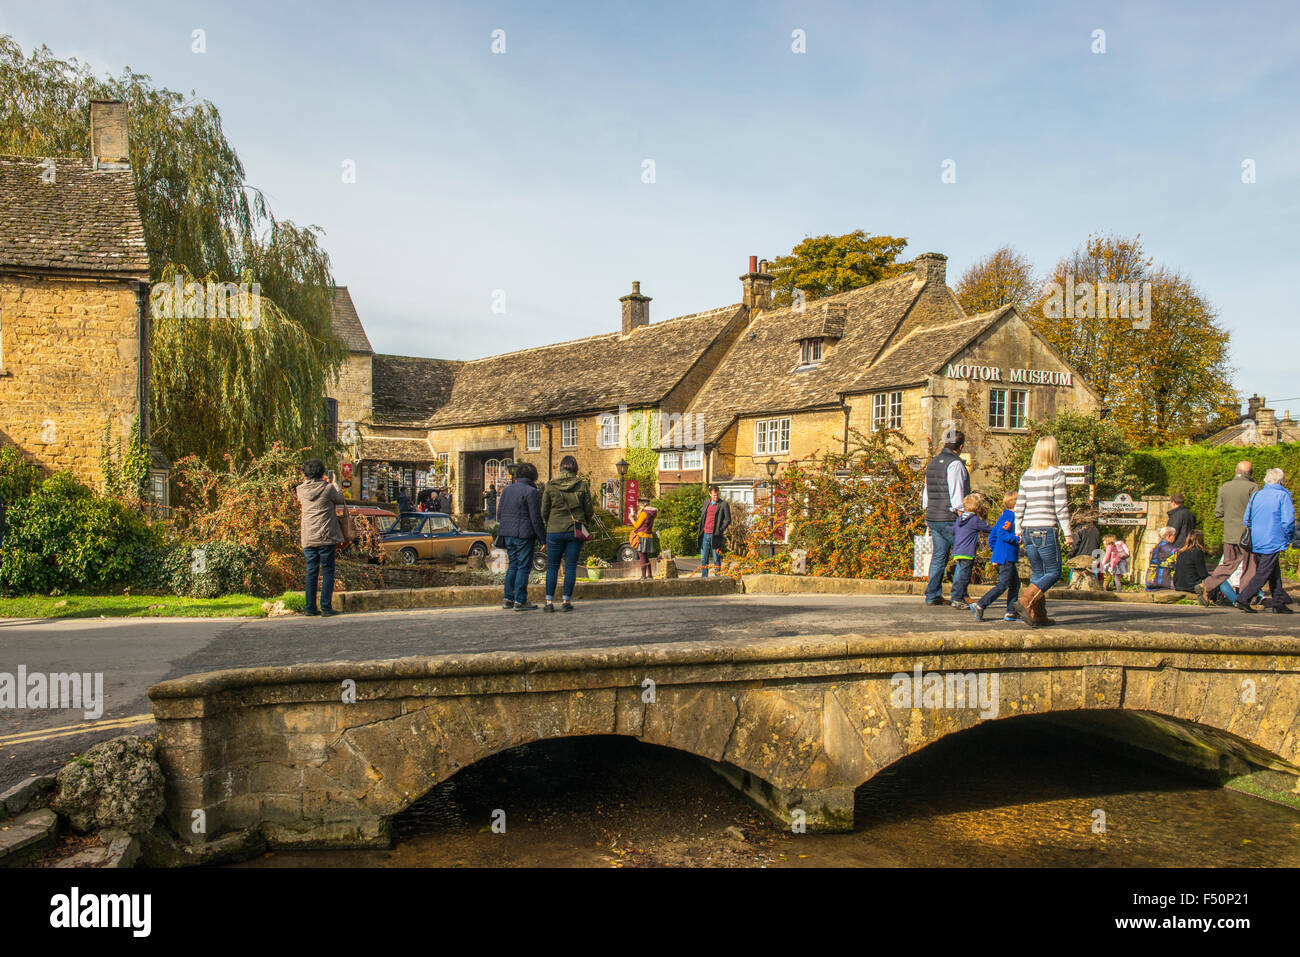 Bridge over the River Windrush near the Motor Museum at Bourton on the Water in the Cotswolds Gloucestershire Stock Photo